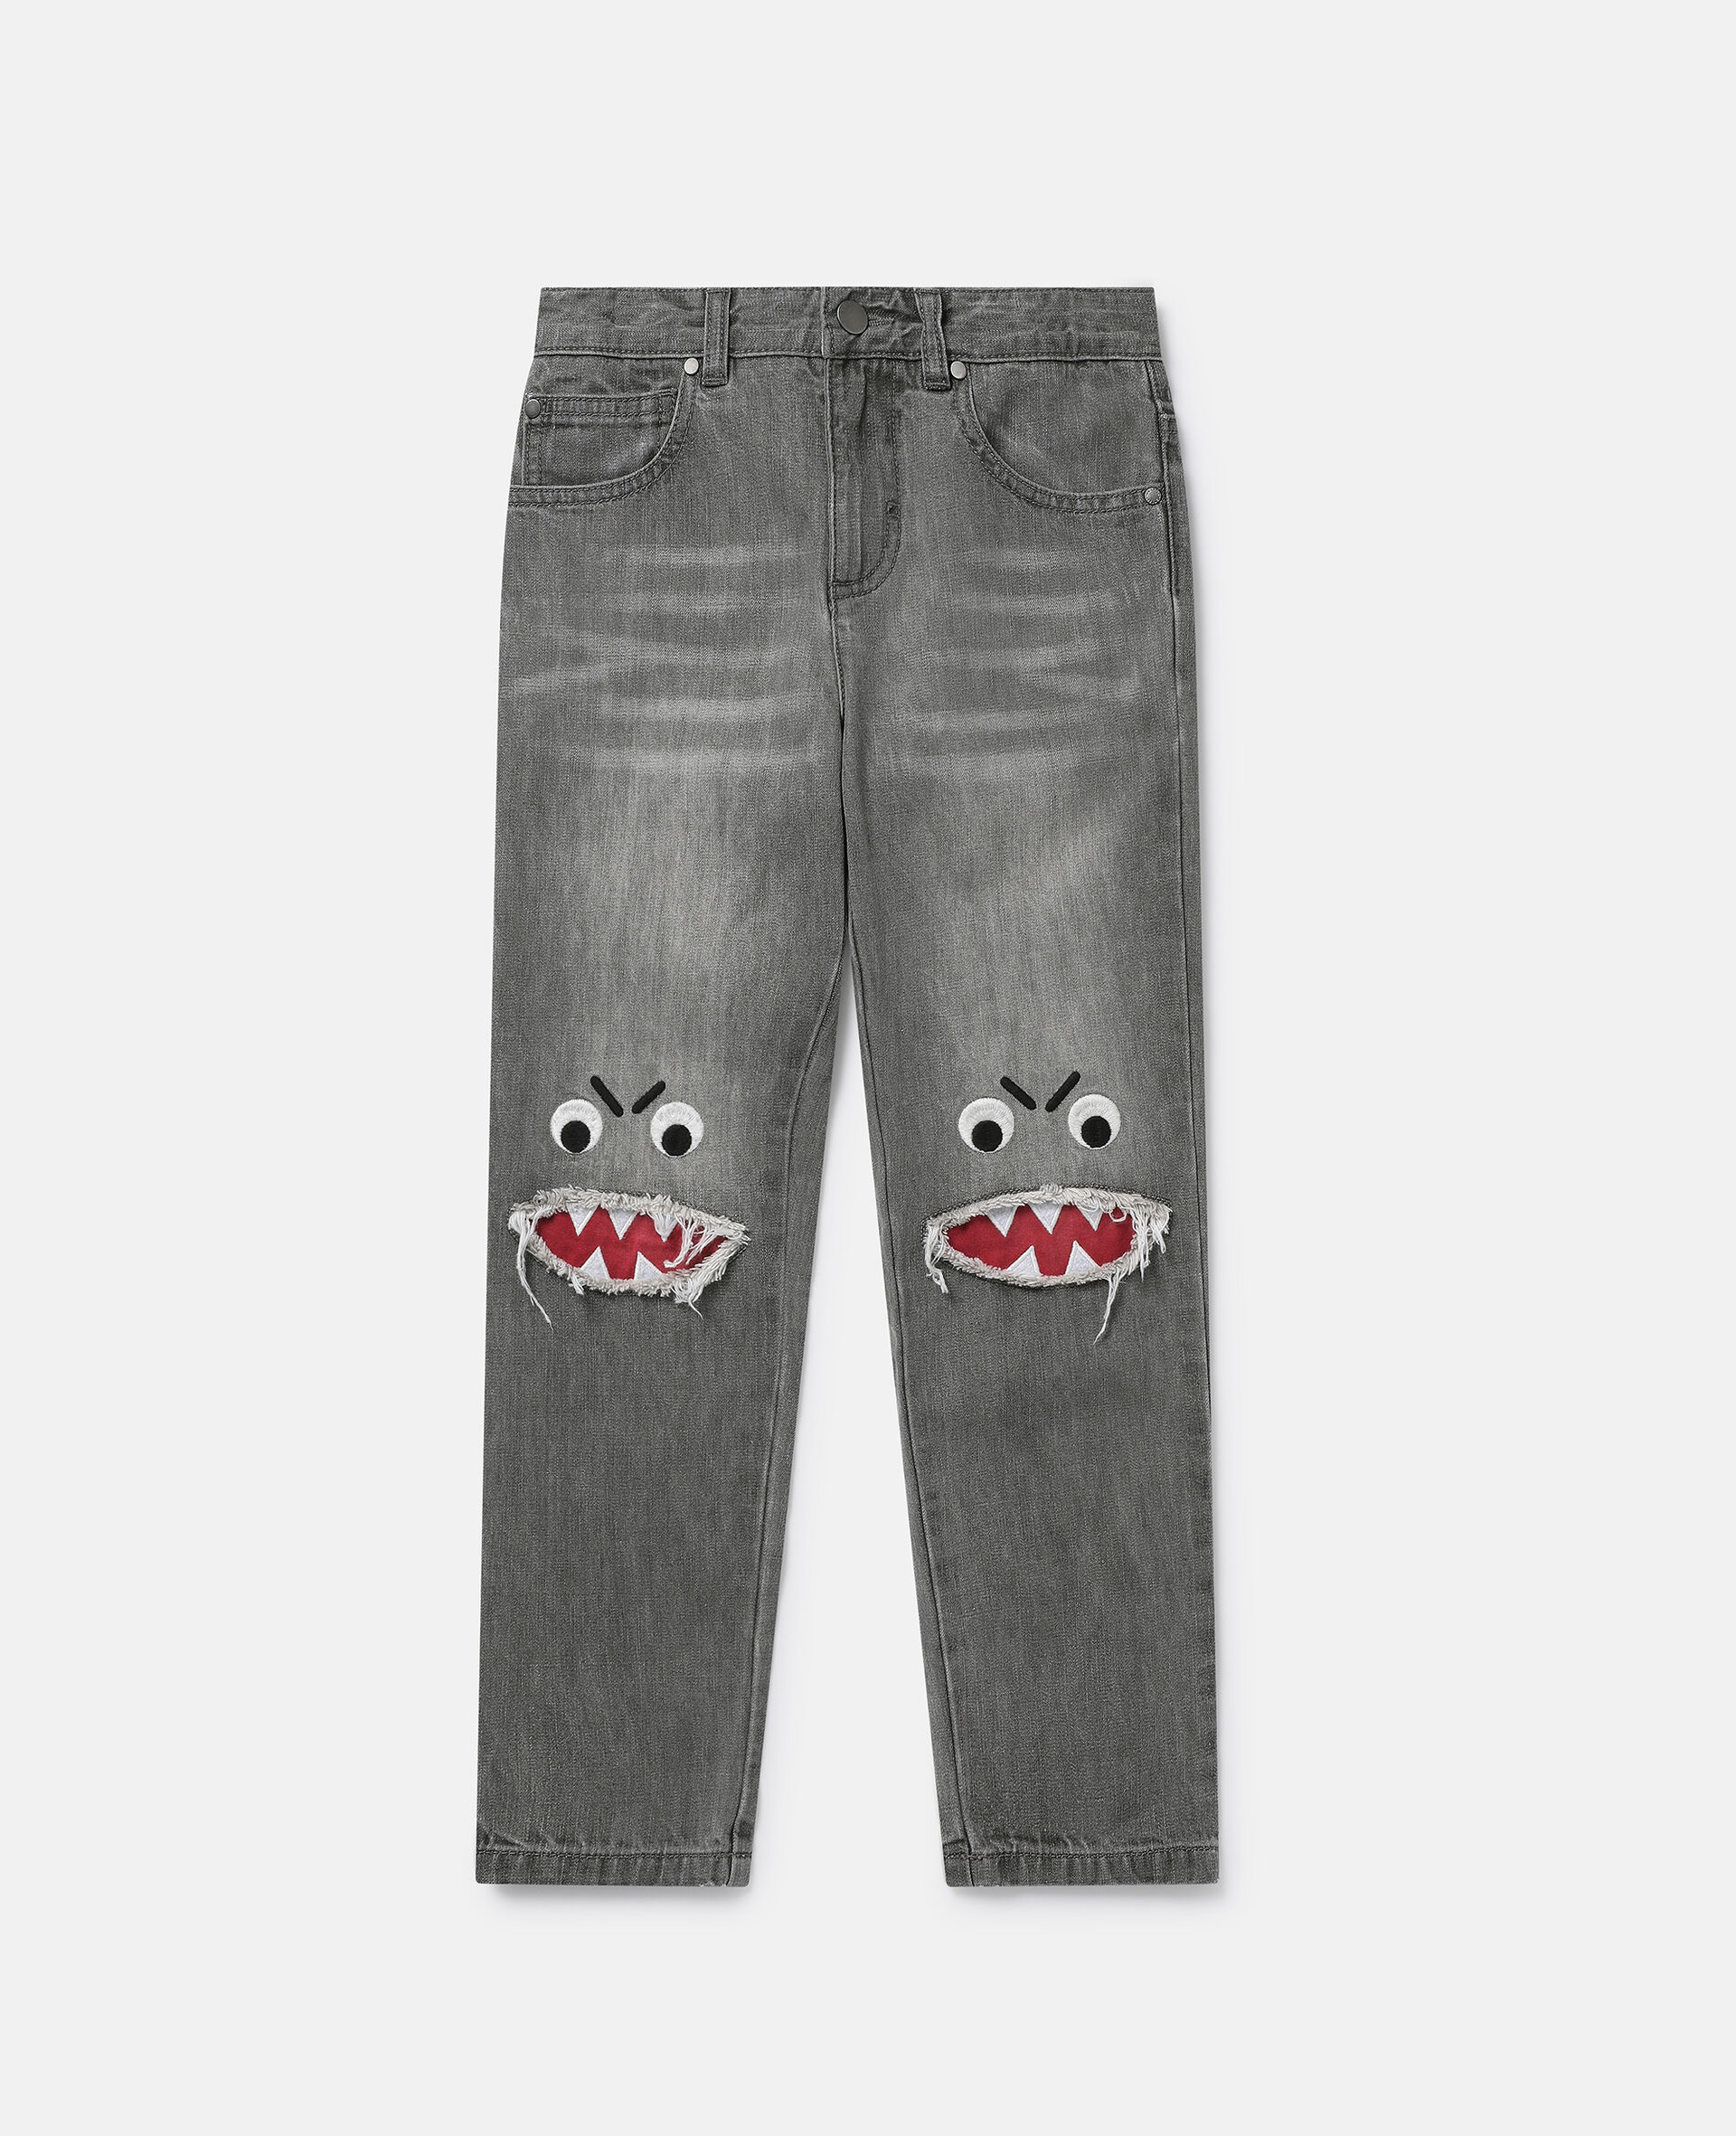 Shark Face Ripped Skinny Jeans-グレー-large image number 0